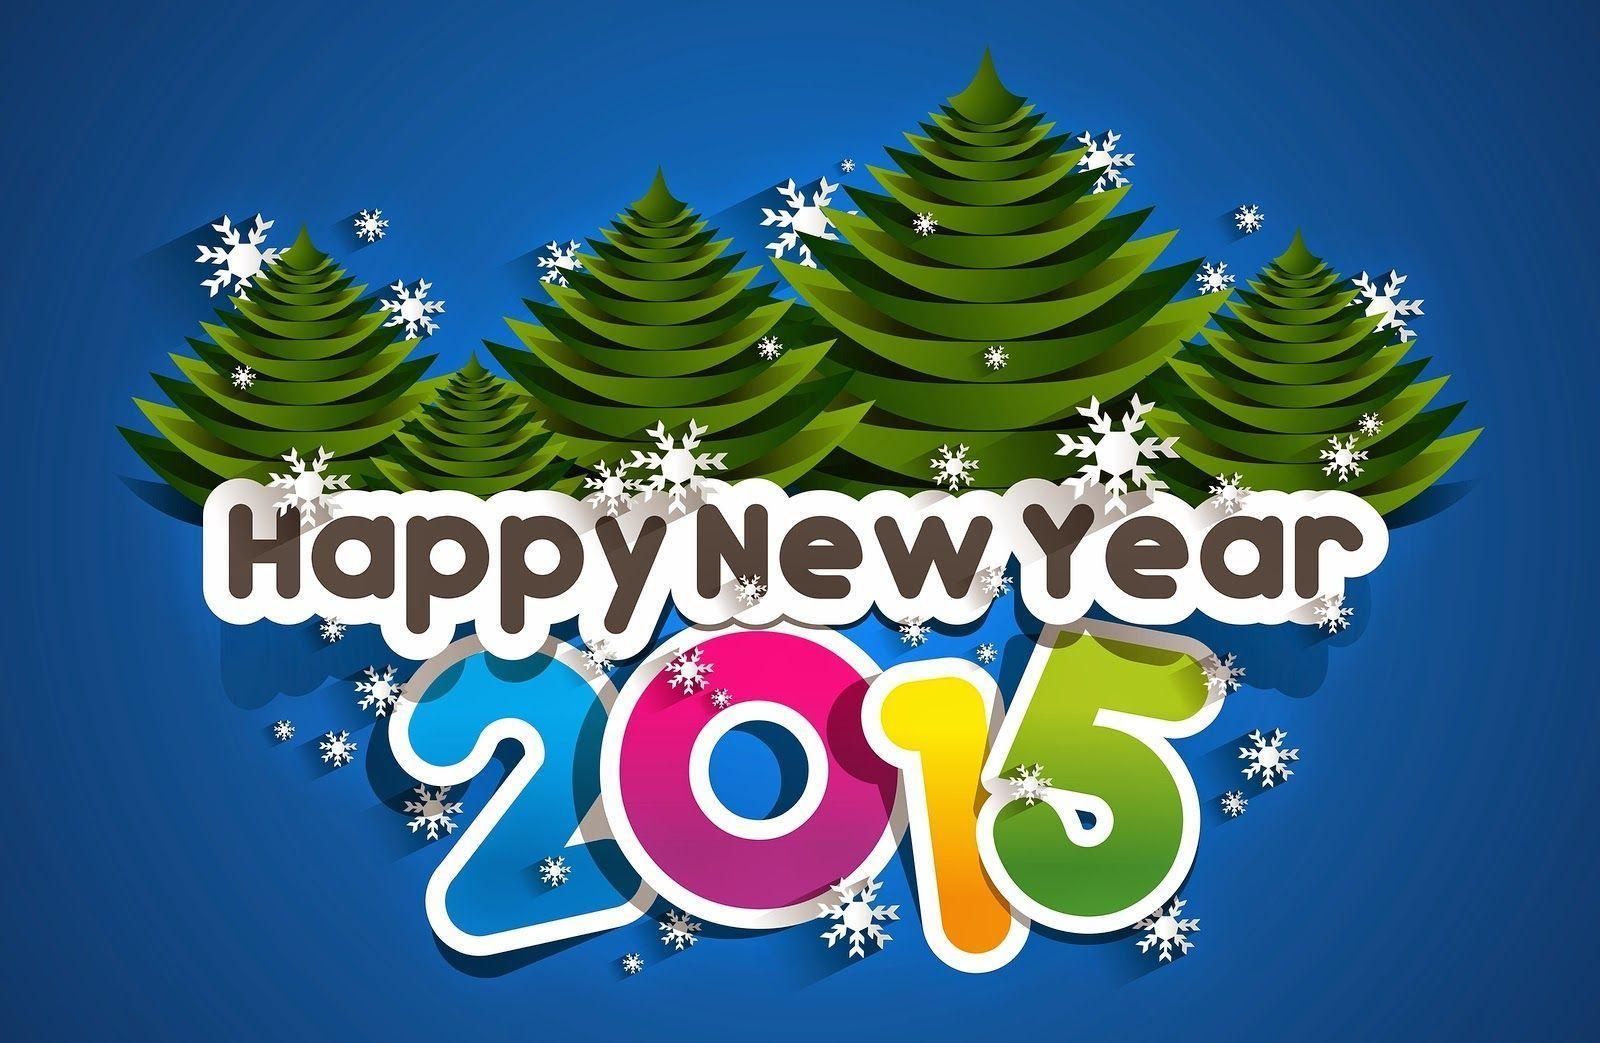 Download Best Happy New Year 2015 Image